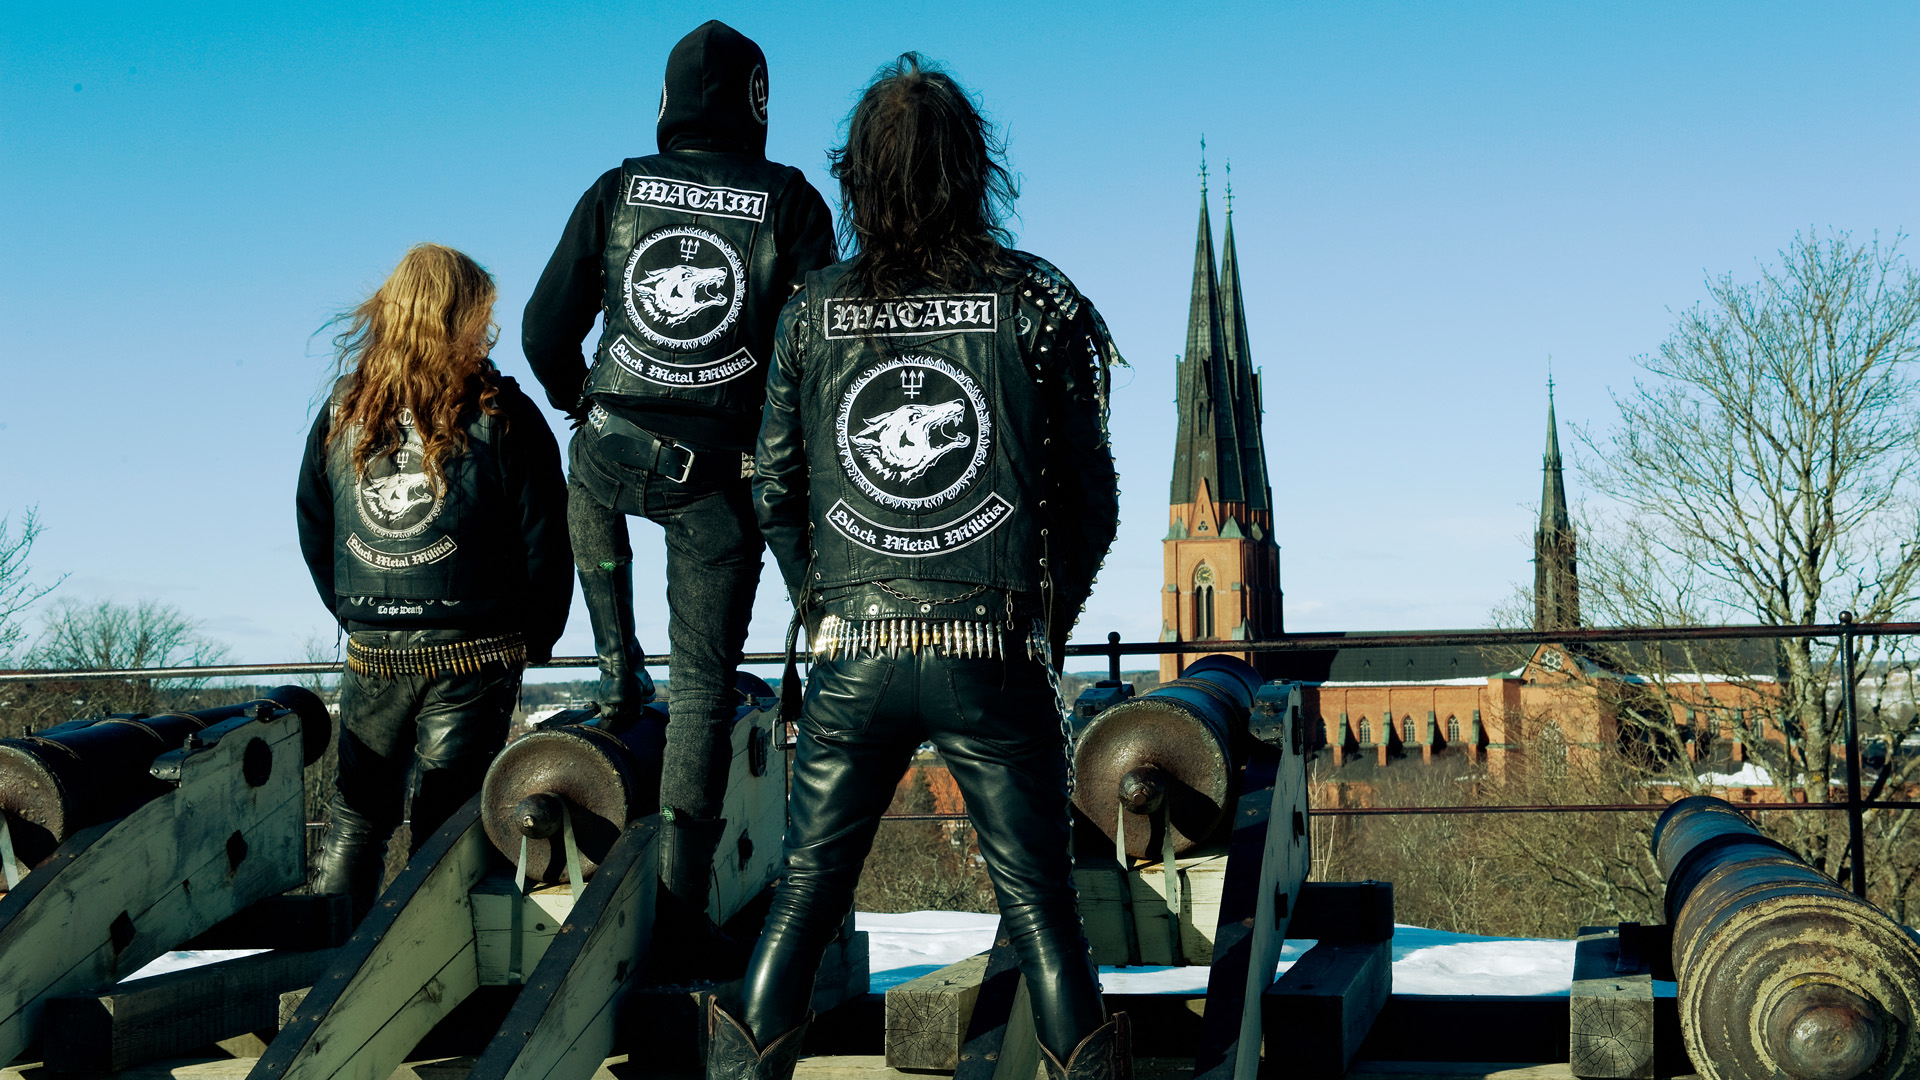 People 1920x1080 Watain metal band cannons bullet trees band logo humor black metal alternative subculture metalheads leather jacket